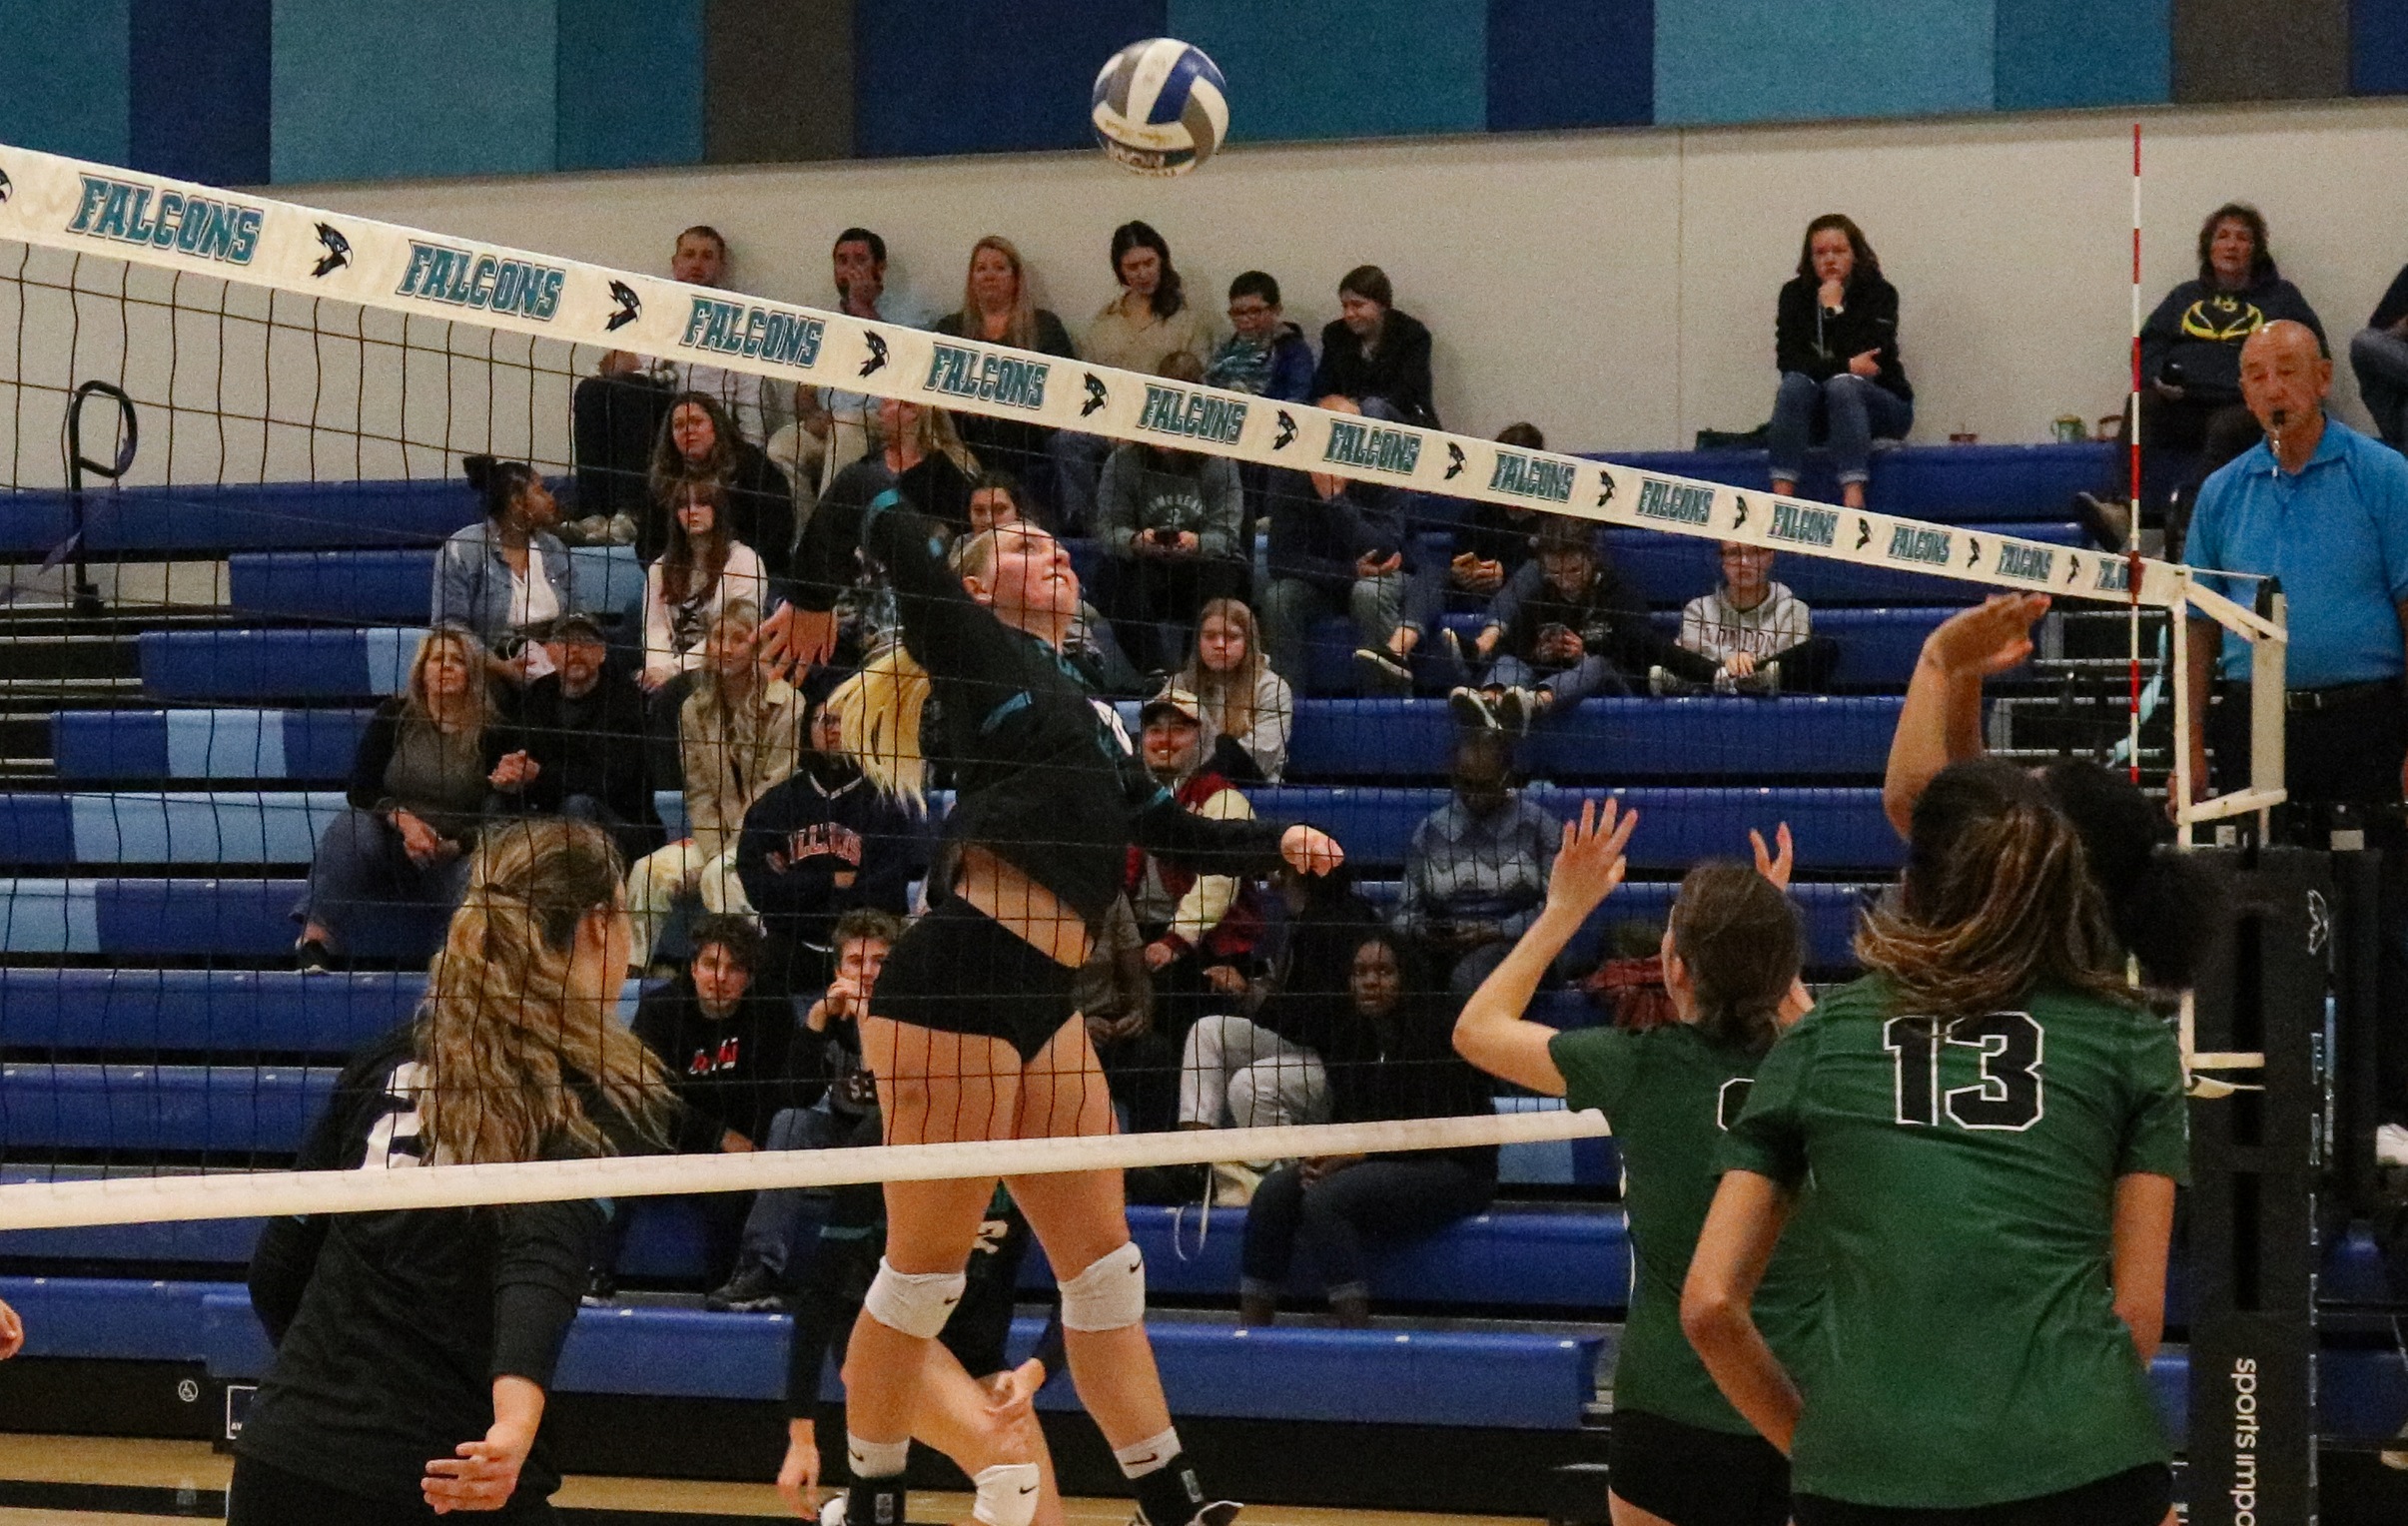 Falcons sweep CRC in regular season finale for 3rd sweep in a row